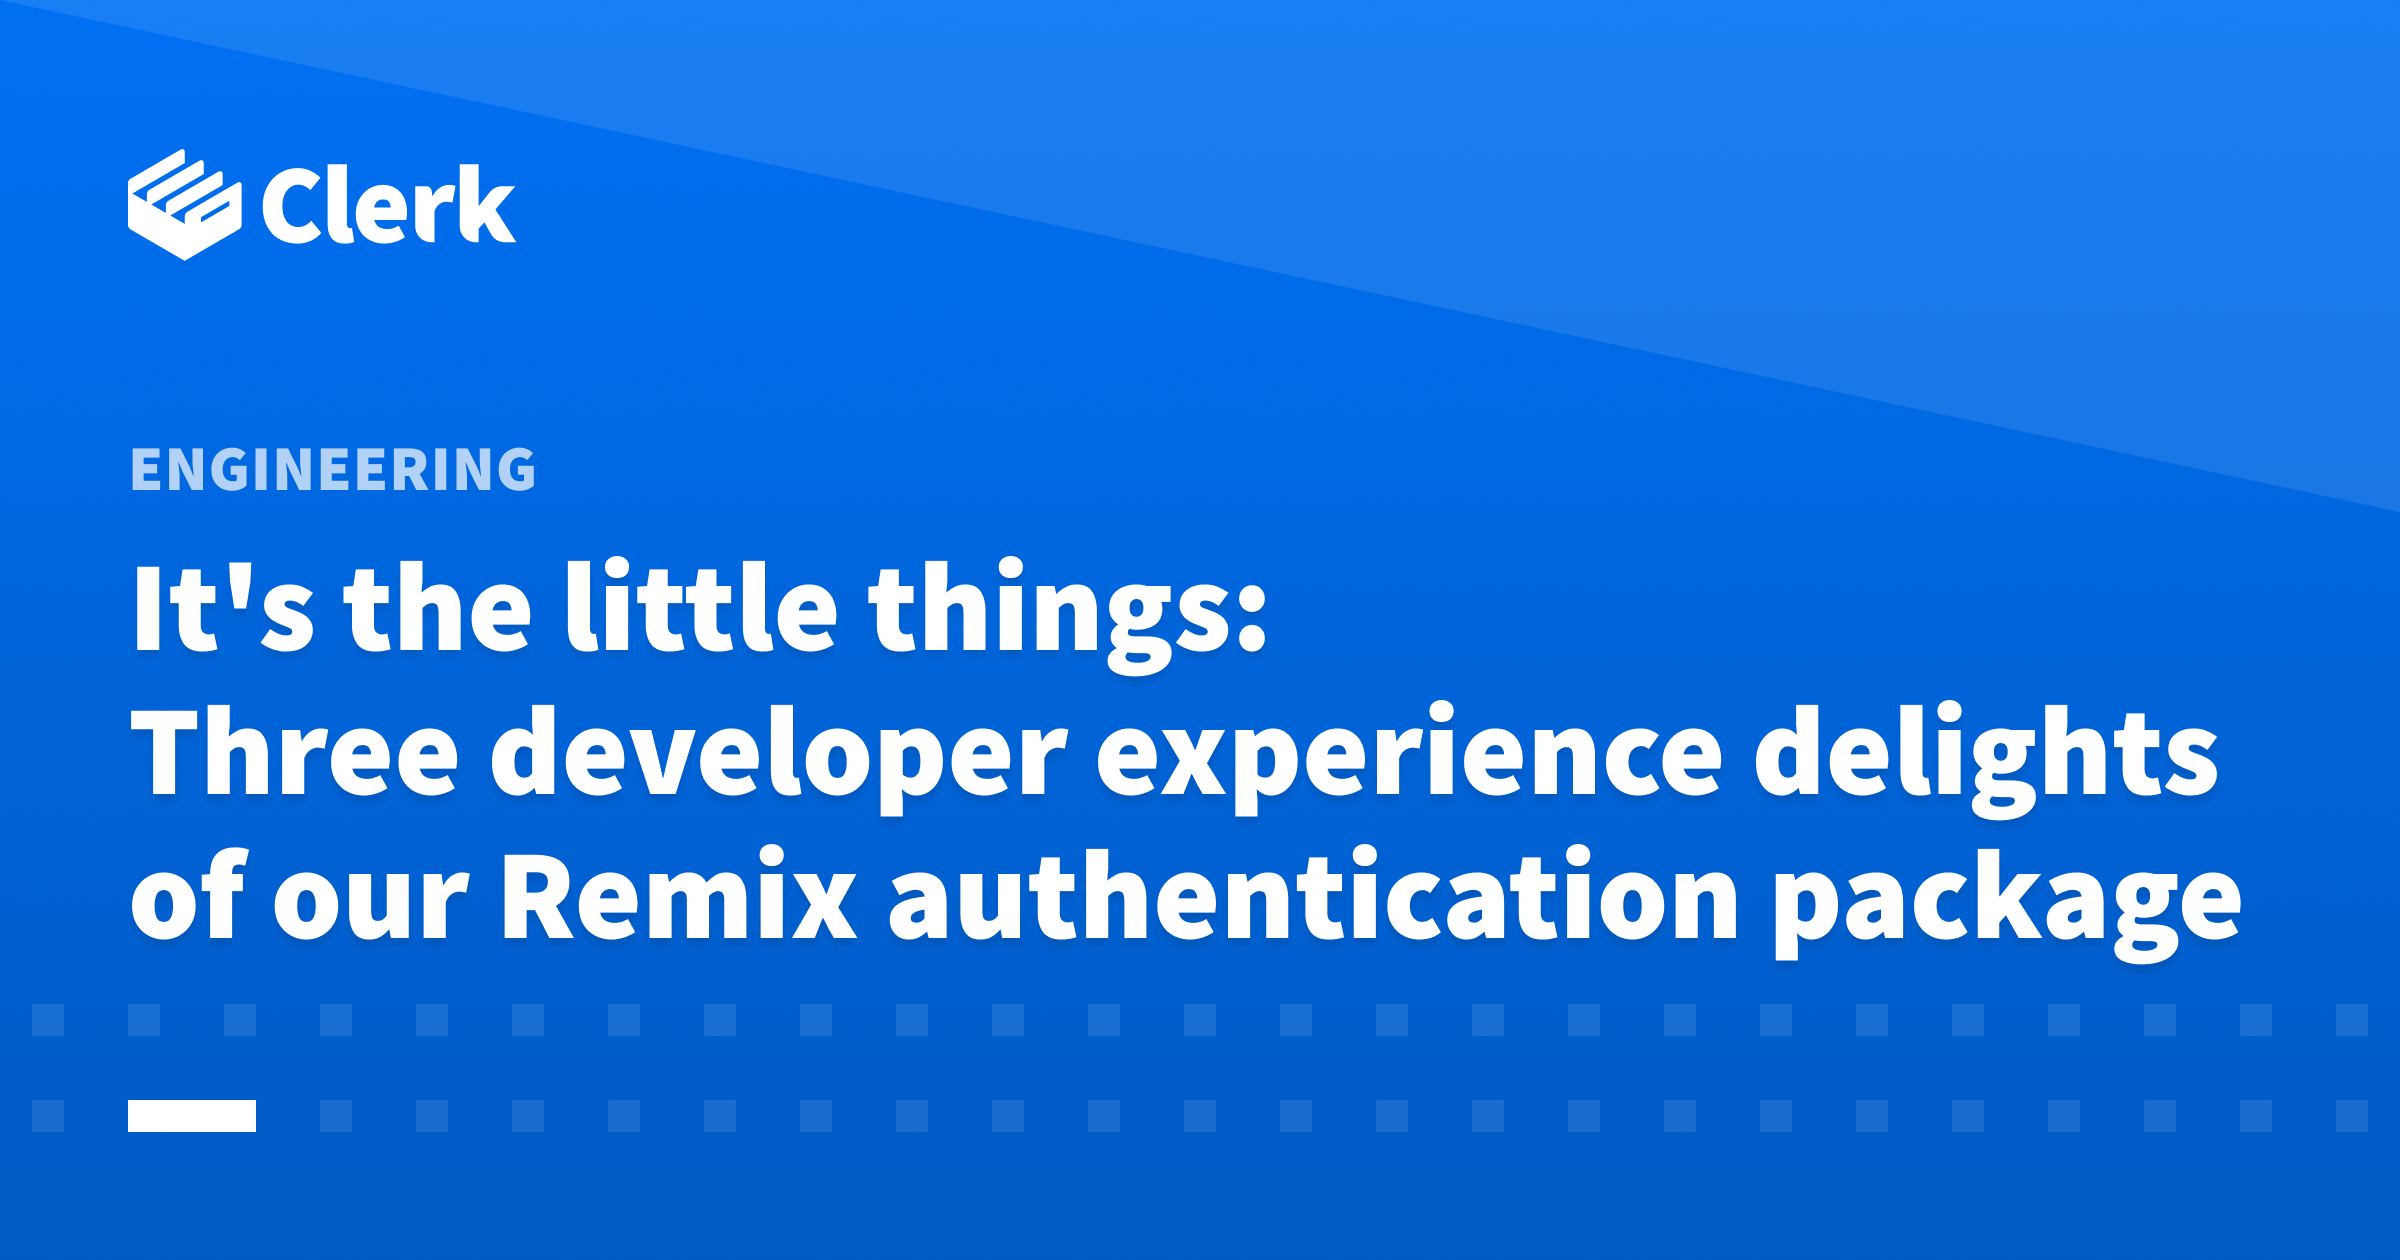 It's the little things: Three developer experience delights of our Remix authentication package